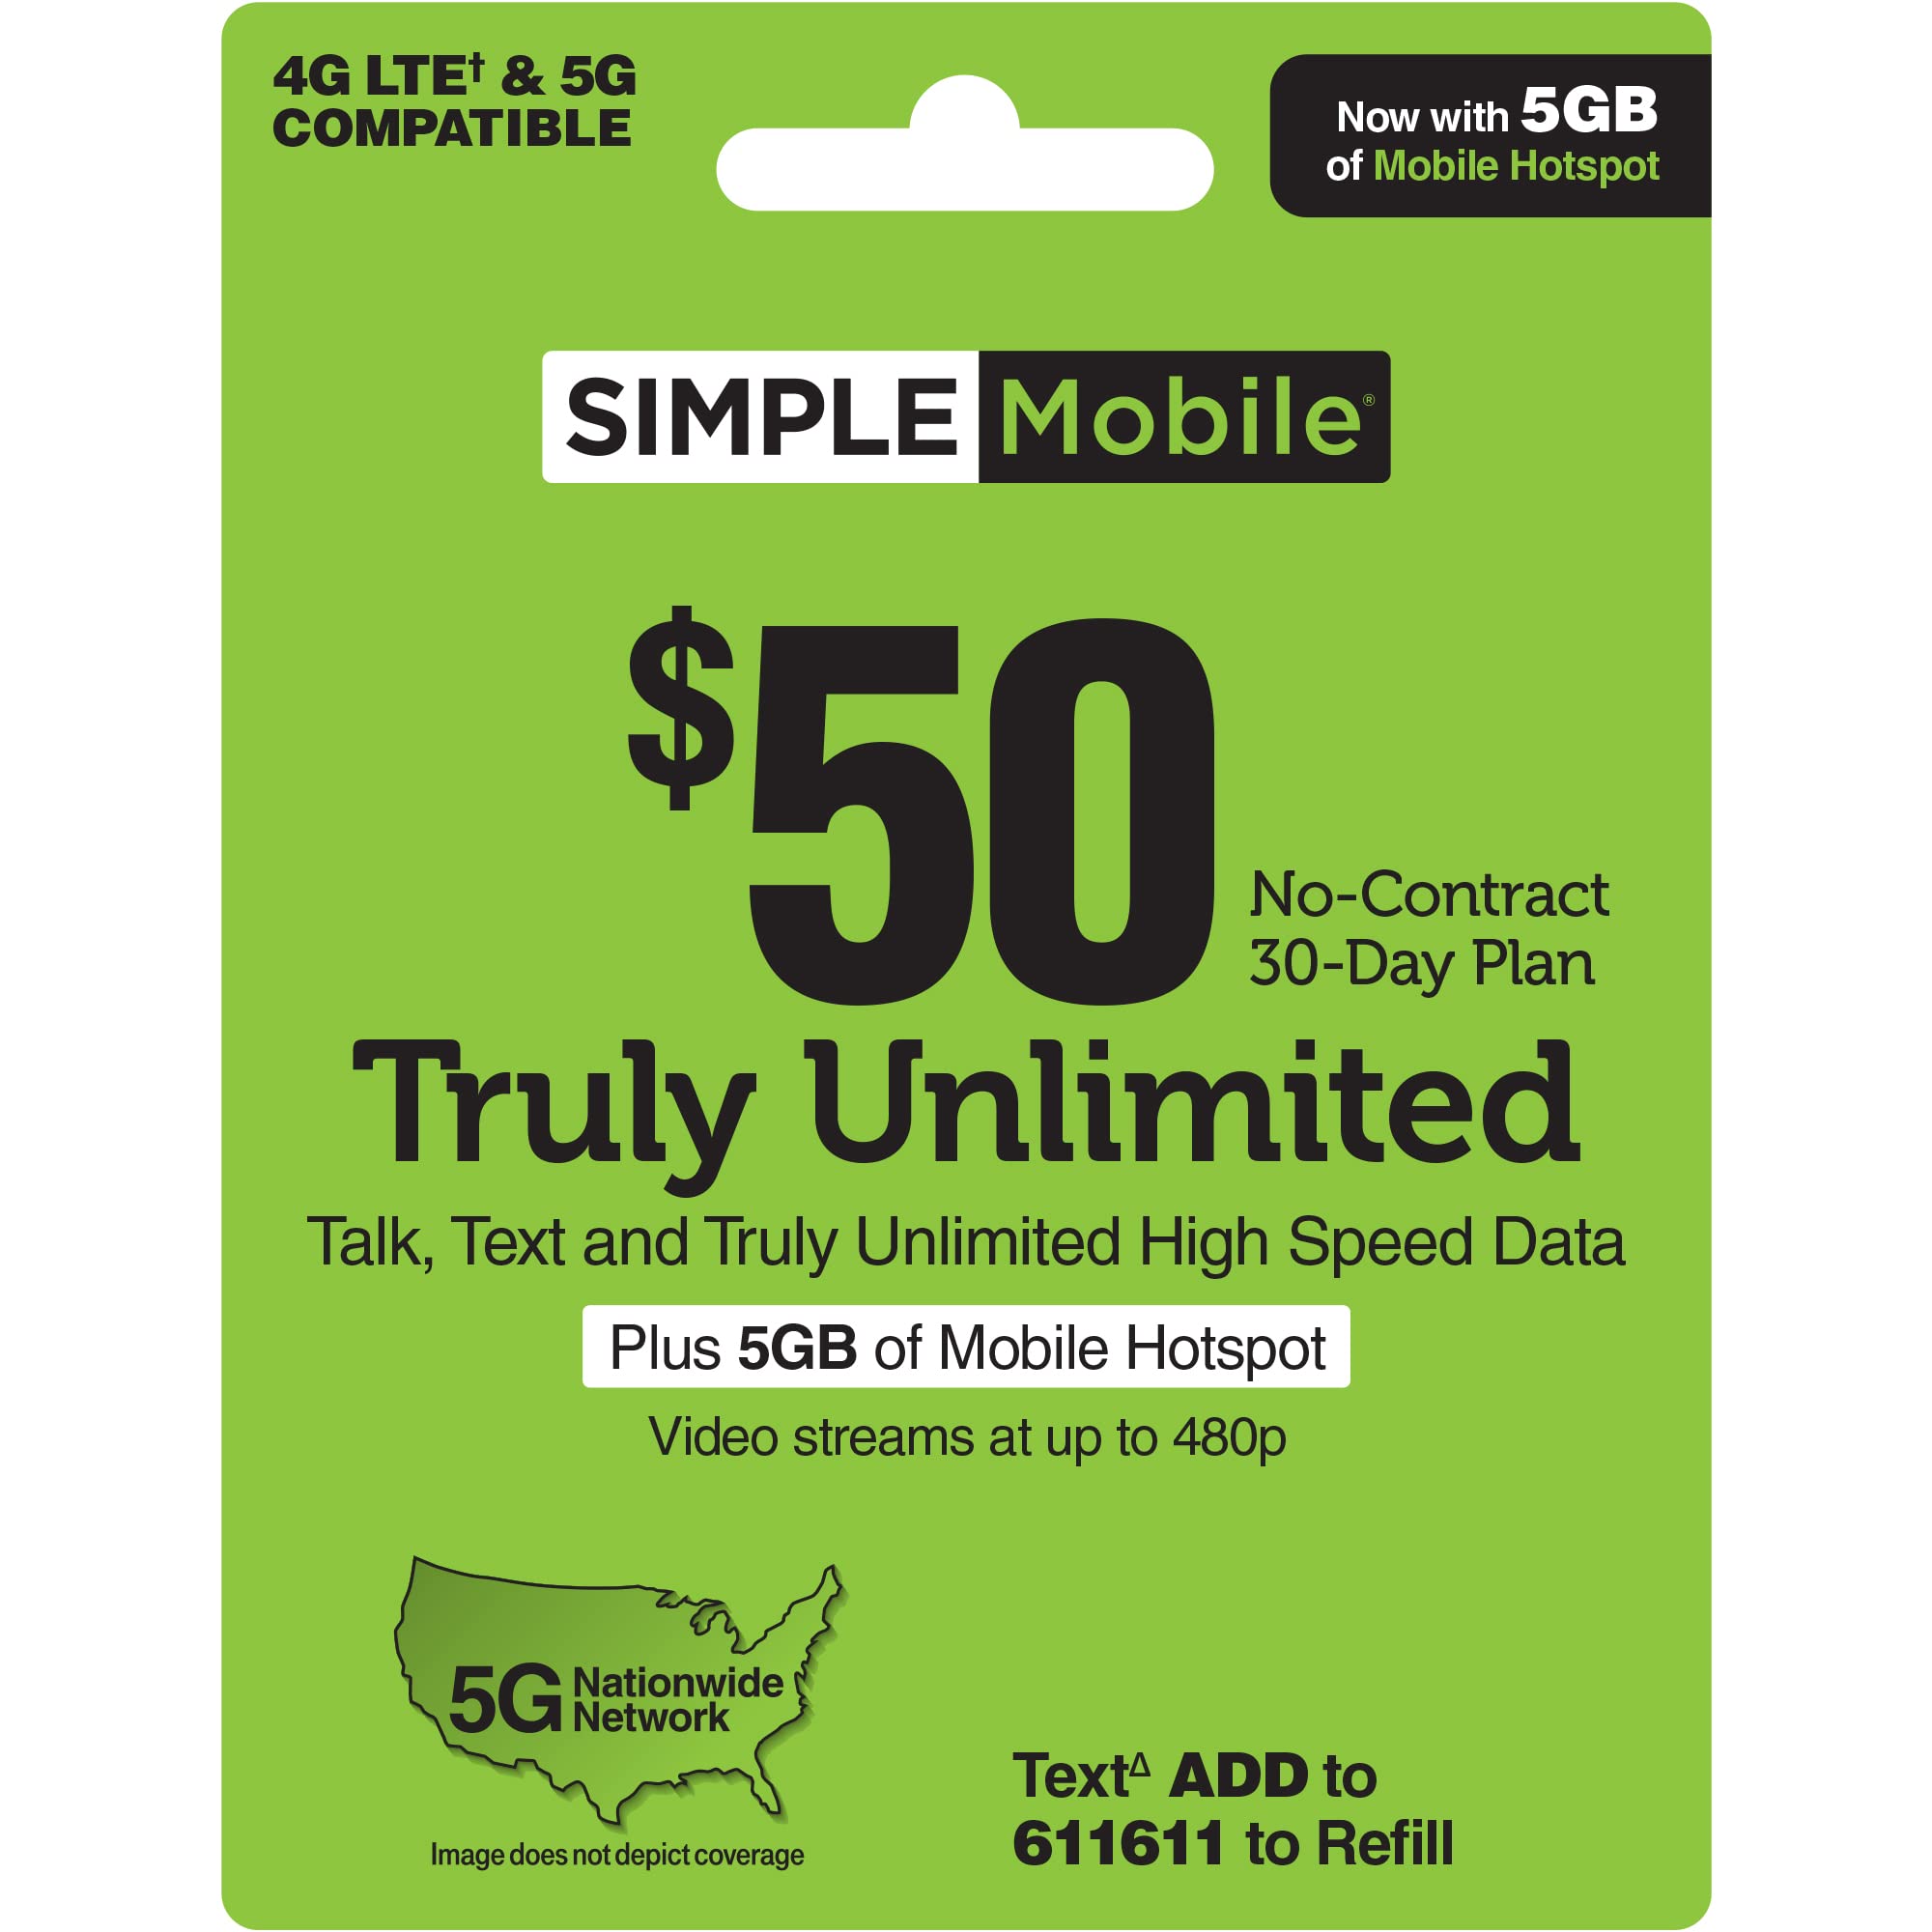 SIMPLE Mobile $50 Truly Unlimited Talk,Text,Data Plan [Physical Delivery]